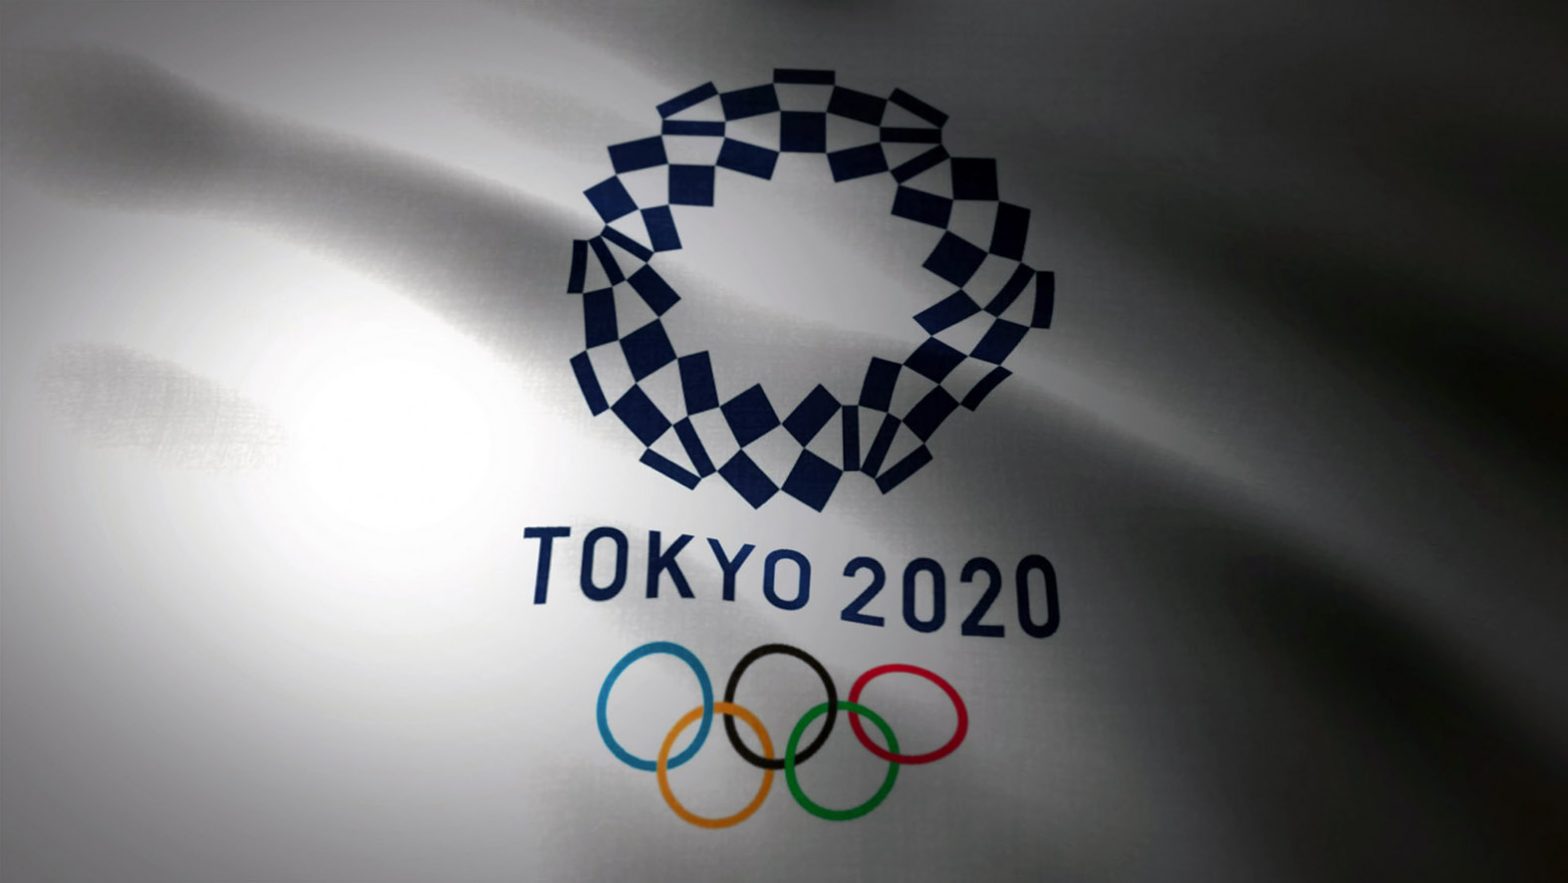 Flag of the olympic games in Tokyo 2020